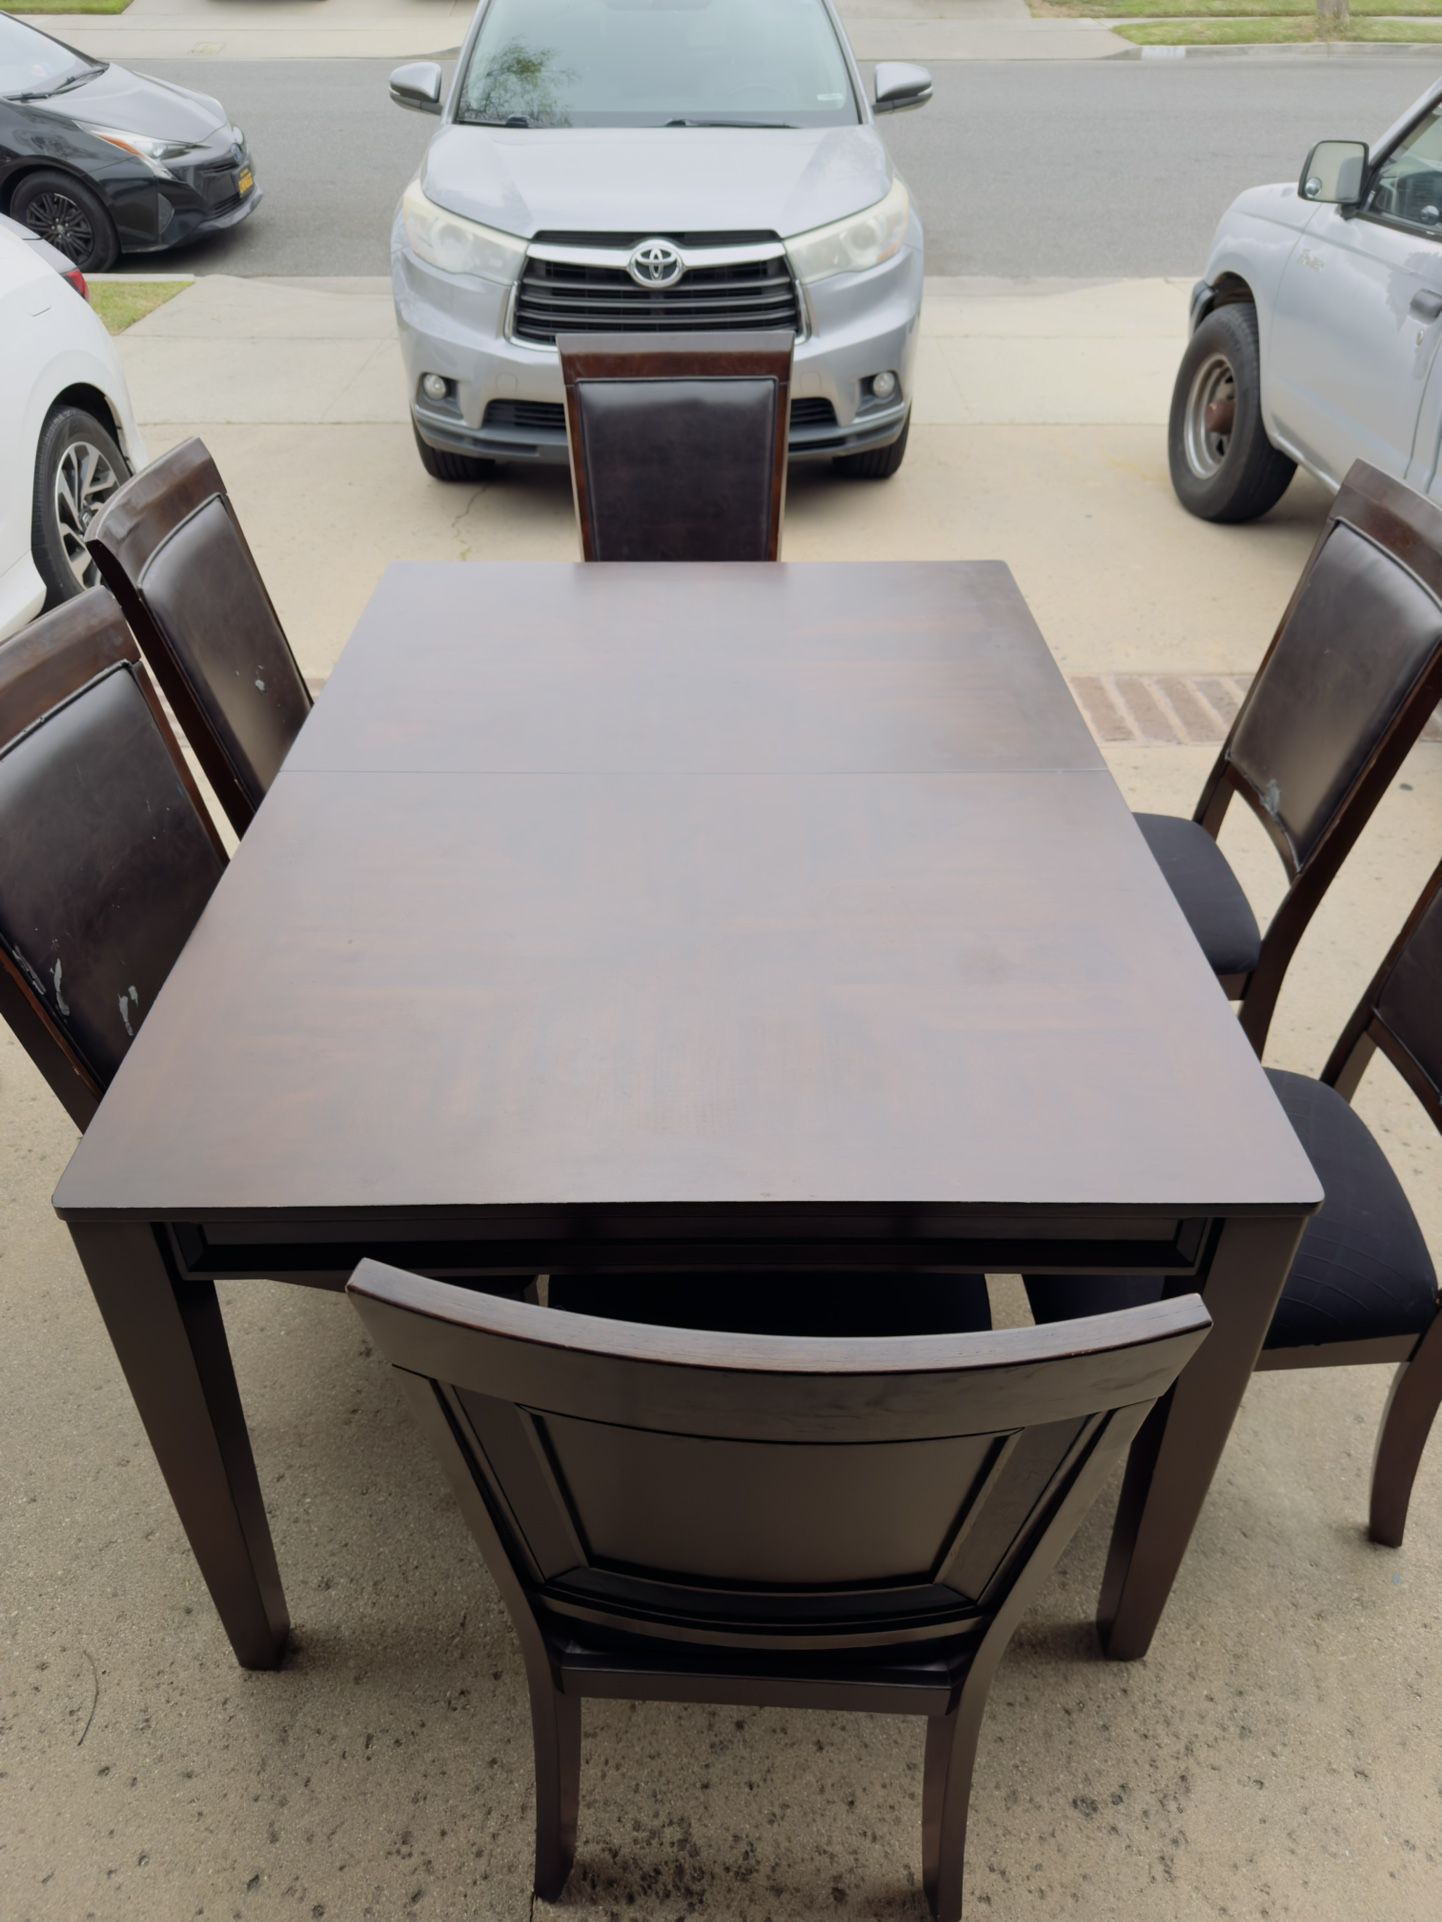 Ashley 6 Person Table With Middle Part 